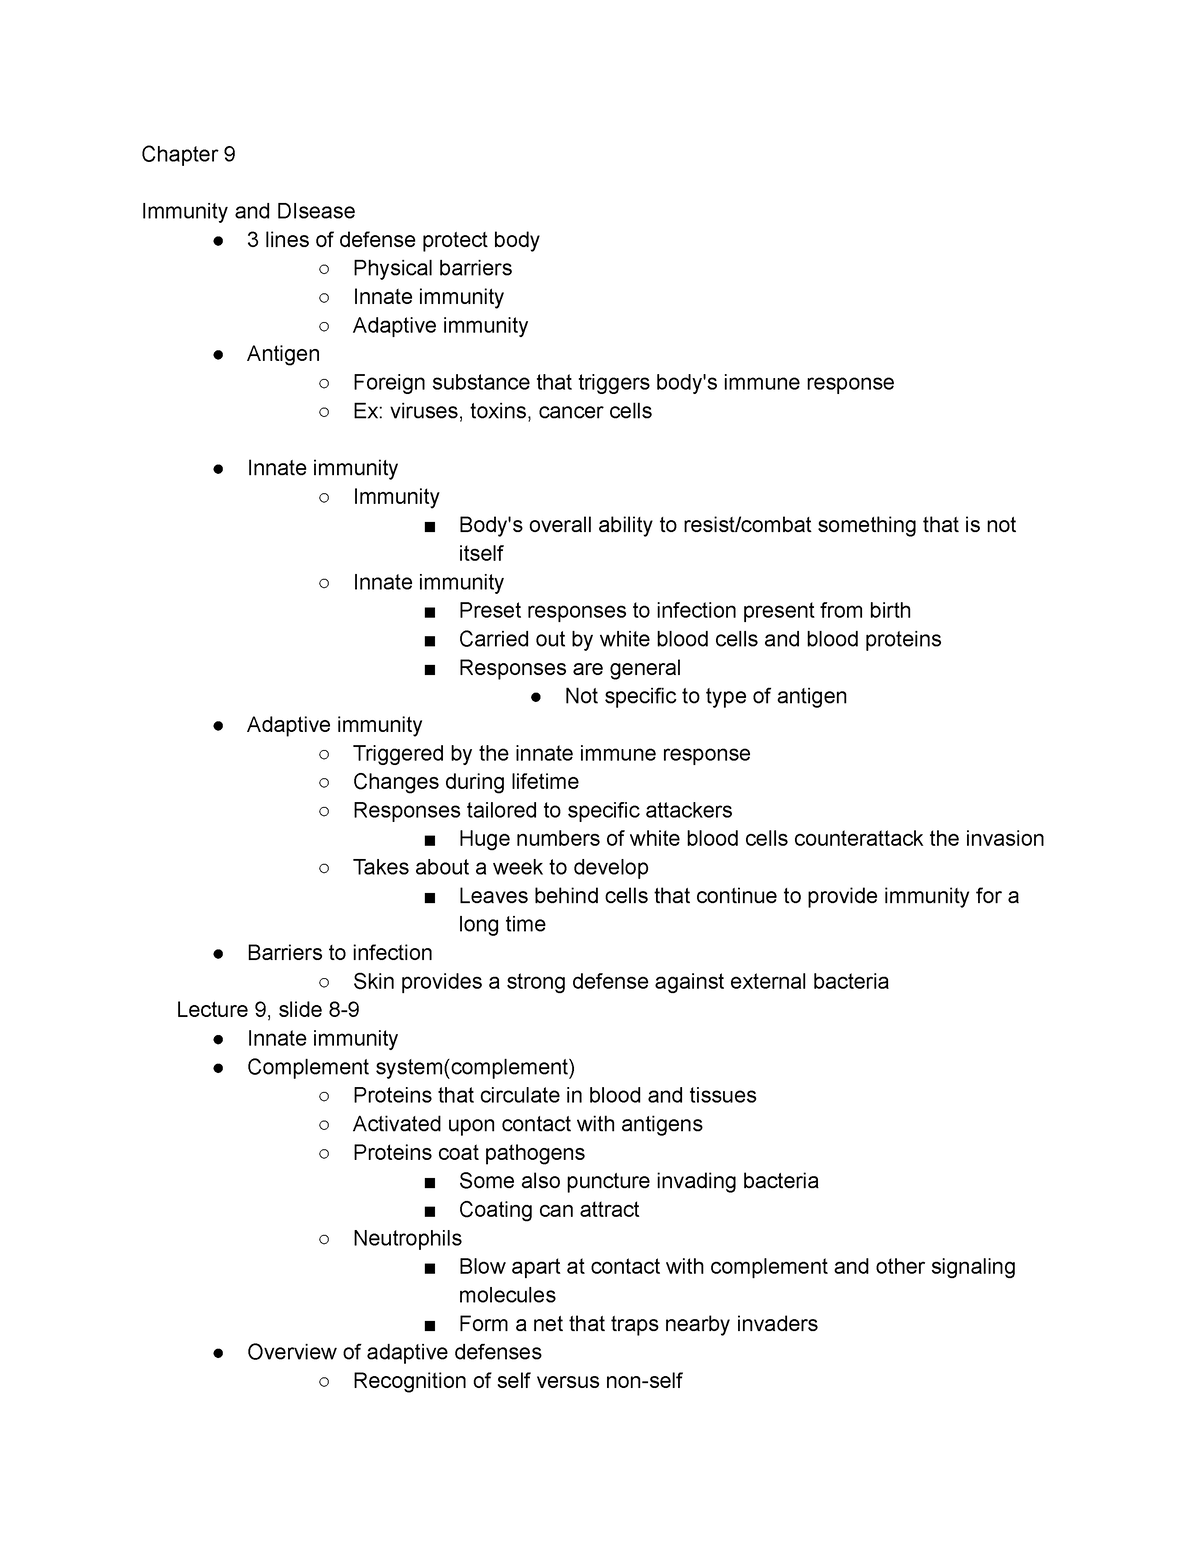 Hum Bio chaps 9-10 - These are notes from class in Clinton and Lewis's ...